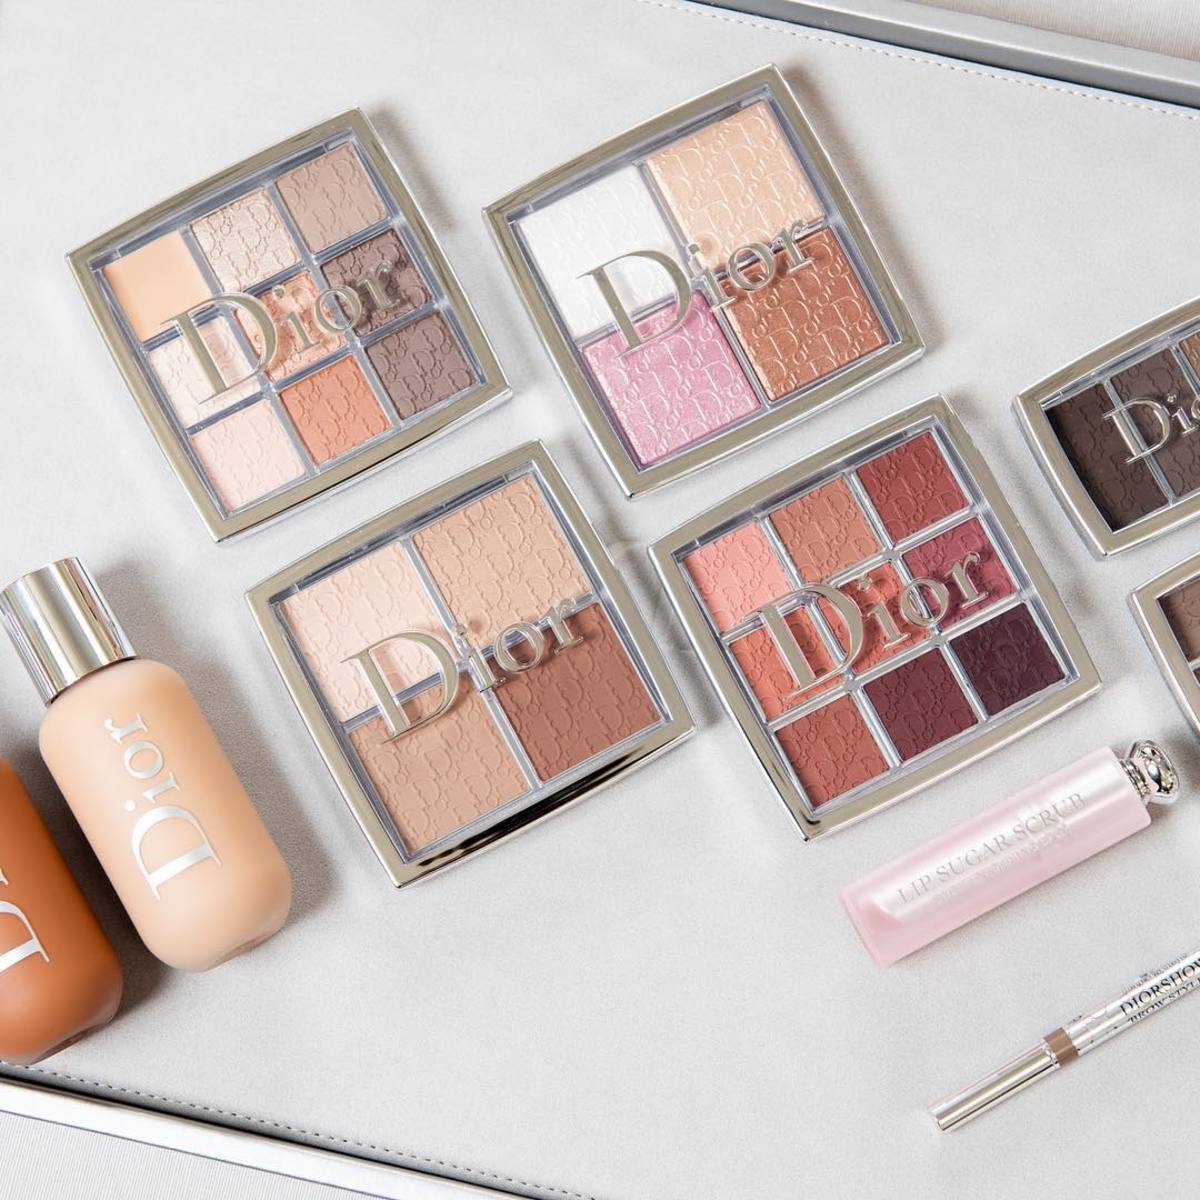 A selection of products from Dior's color cosmetics lineup. Photo: @diormakeup/Instagram